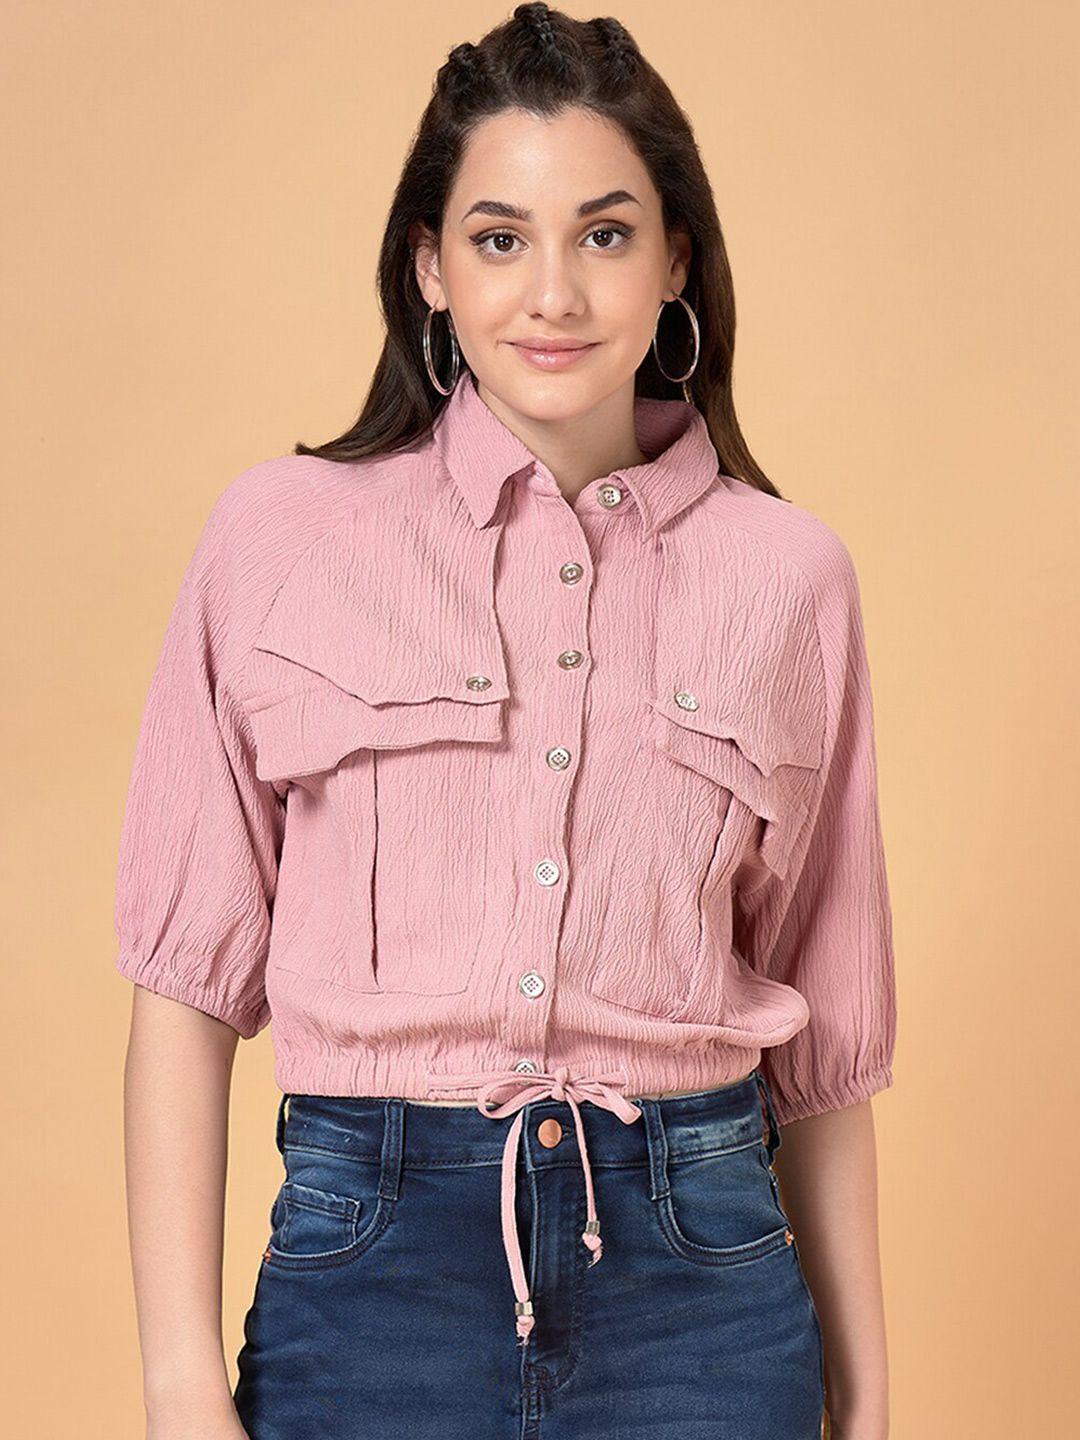 sf jeans by pantaloons textured casual crop shirt